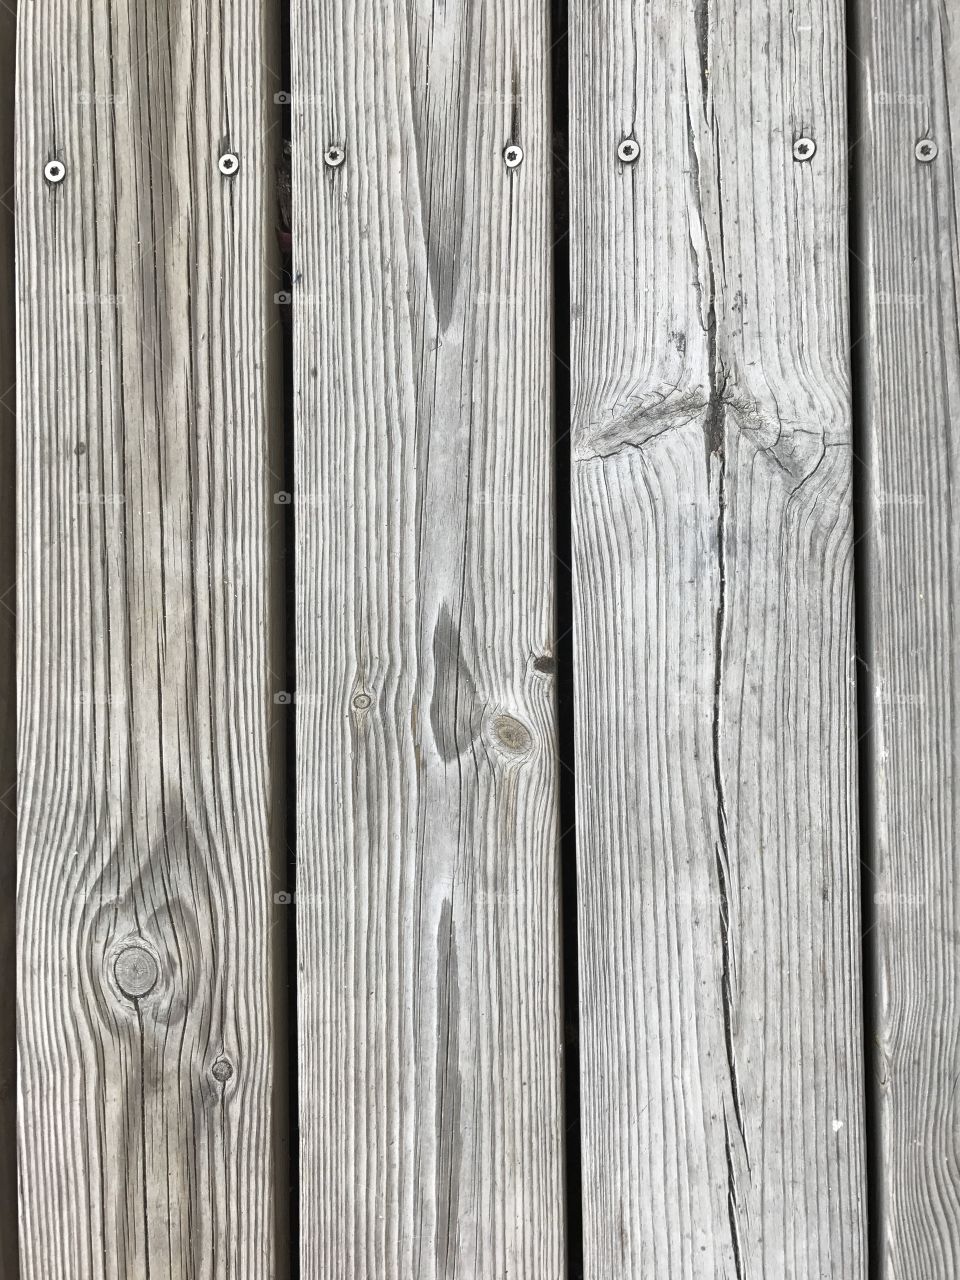 Wood texture/Background old